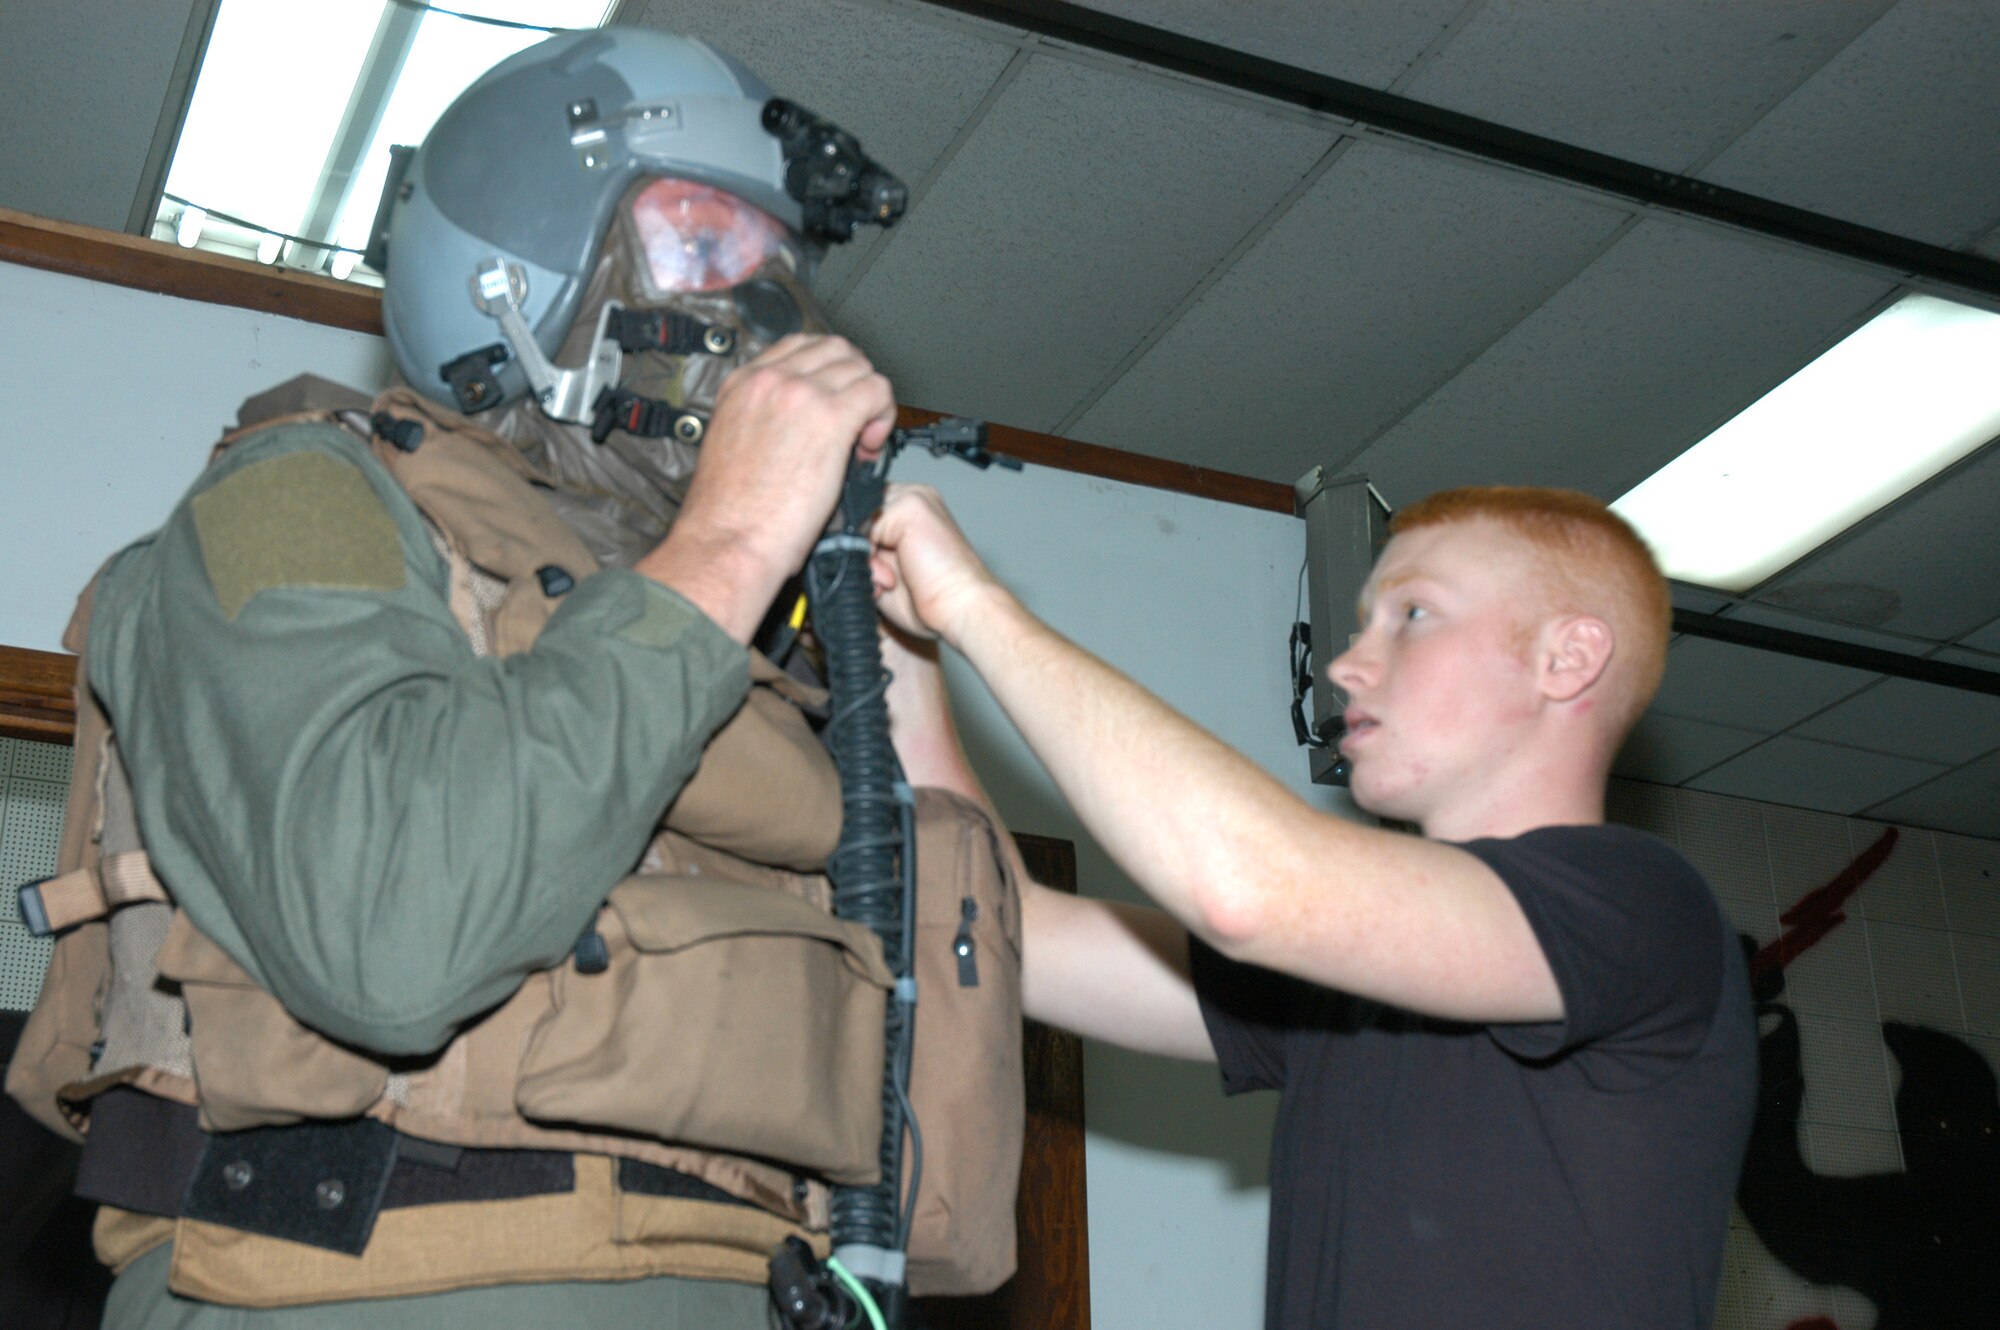 Airman 1st Class Christopher Randolph, 1st Special Operations Squadron life support technician, adjusts equipment for Master Sgt. Don Fannin, 17th Special Operations Squadron loadmaster, during training on the Aircrew Eye and Respiratory Protective System.  This training was part of the Blue Horizon Operational Readiness Exercise. More than 400 members of the 353rd Special Operations Group traveled to Daegu Air Base, Korea, for the exercise.    (Air Force/Master Sgt. Marilyn Holliday)
